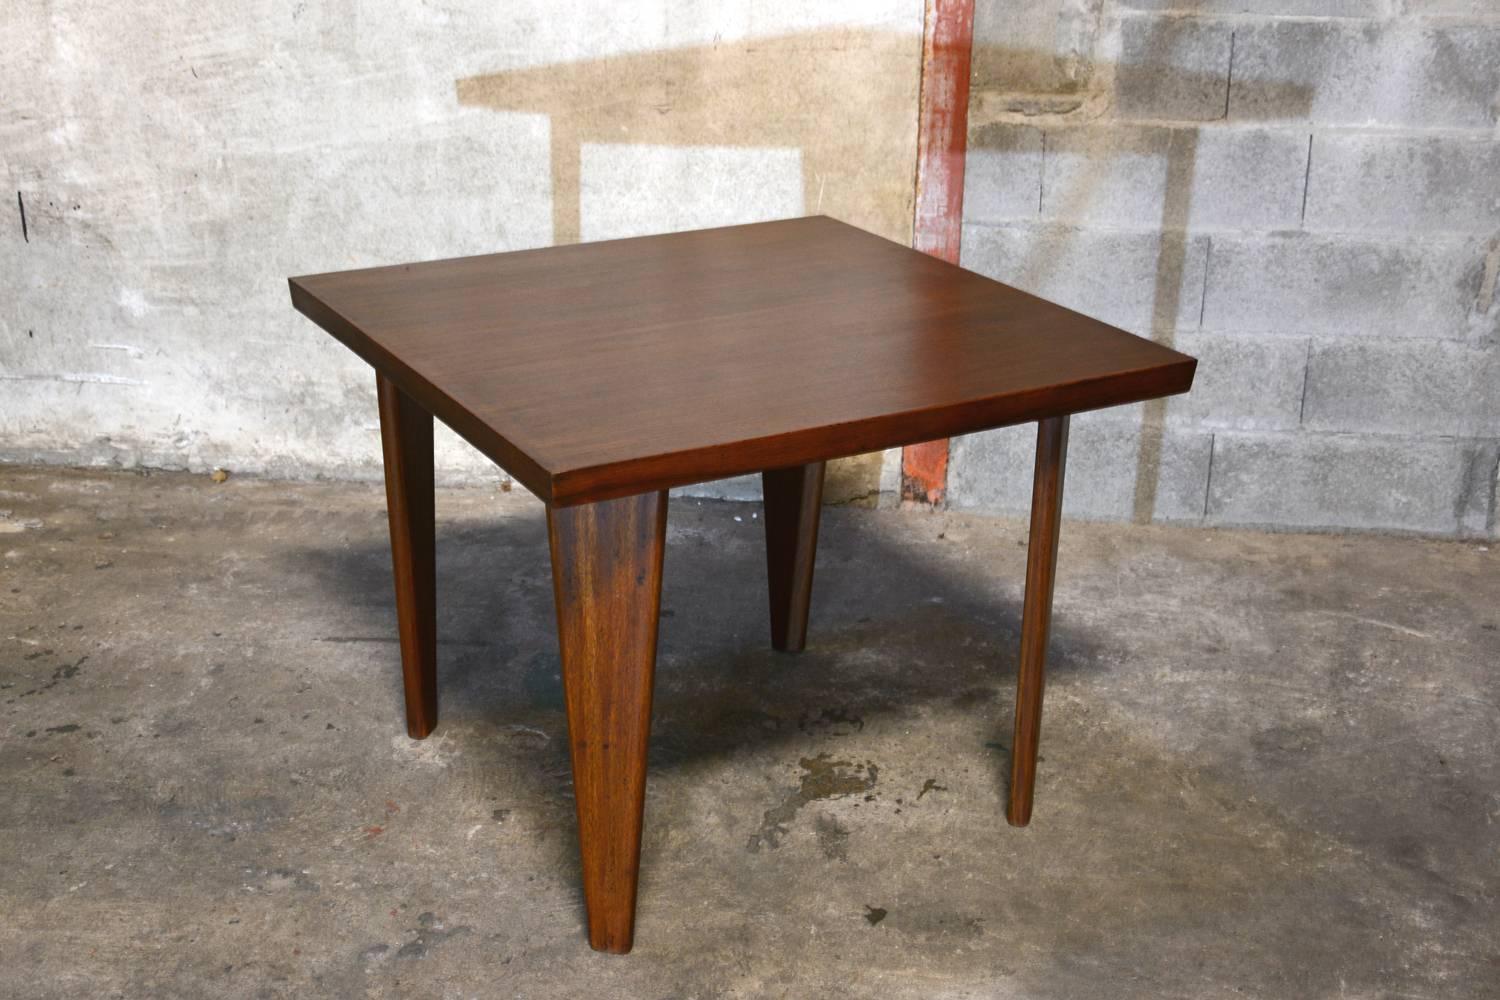 Pierre Jeanneret, square table for the administration building in Chandigarh, India. See photo before restoration when I bought it in Chandigarh.
Auction: Sold 12 733 € at Phillips UK the 24/09/2014.

Literature: P. 585 REF PJ-TAT-04-A in: Eric